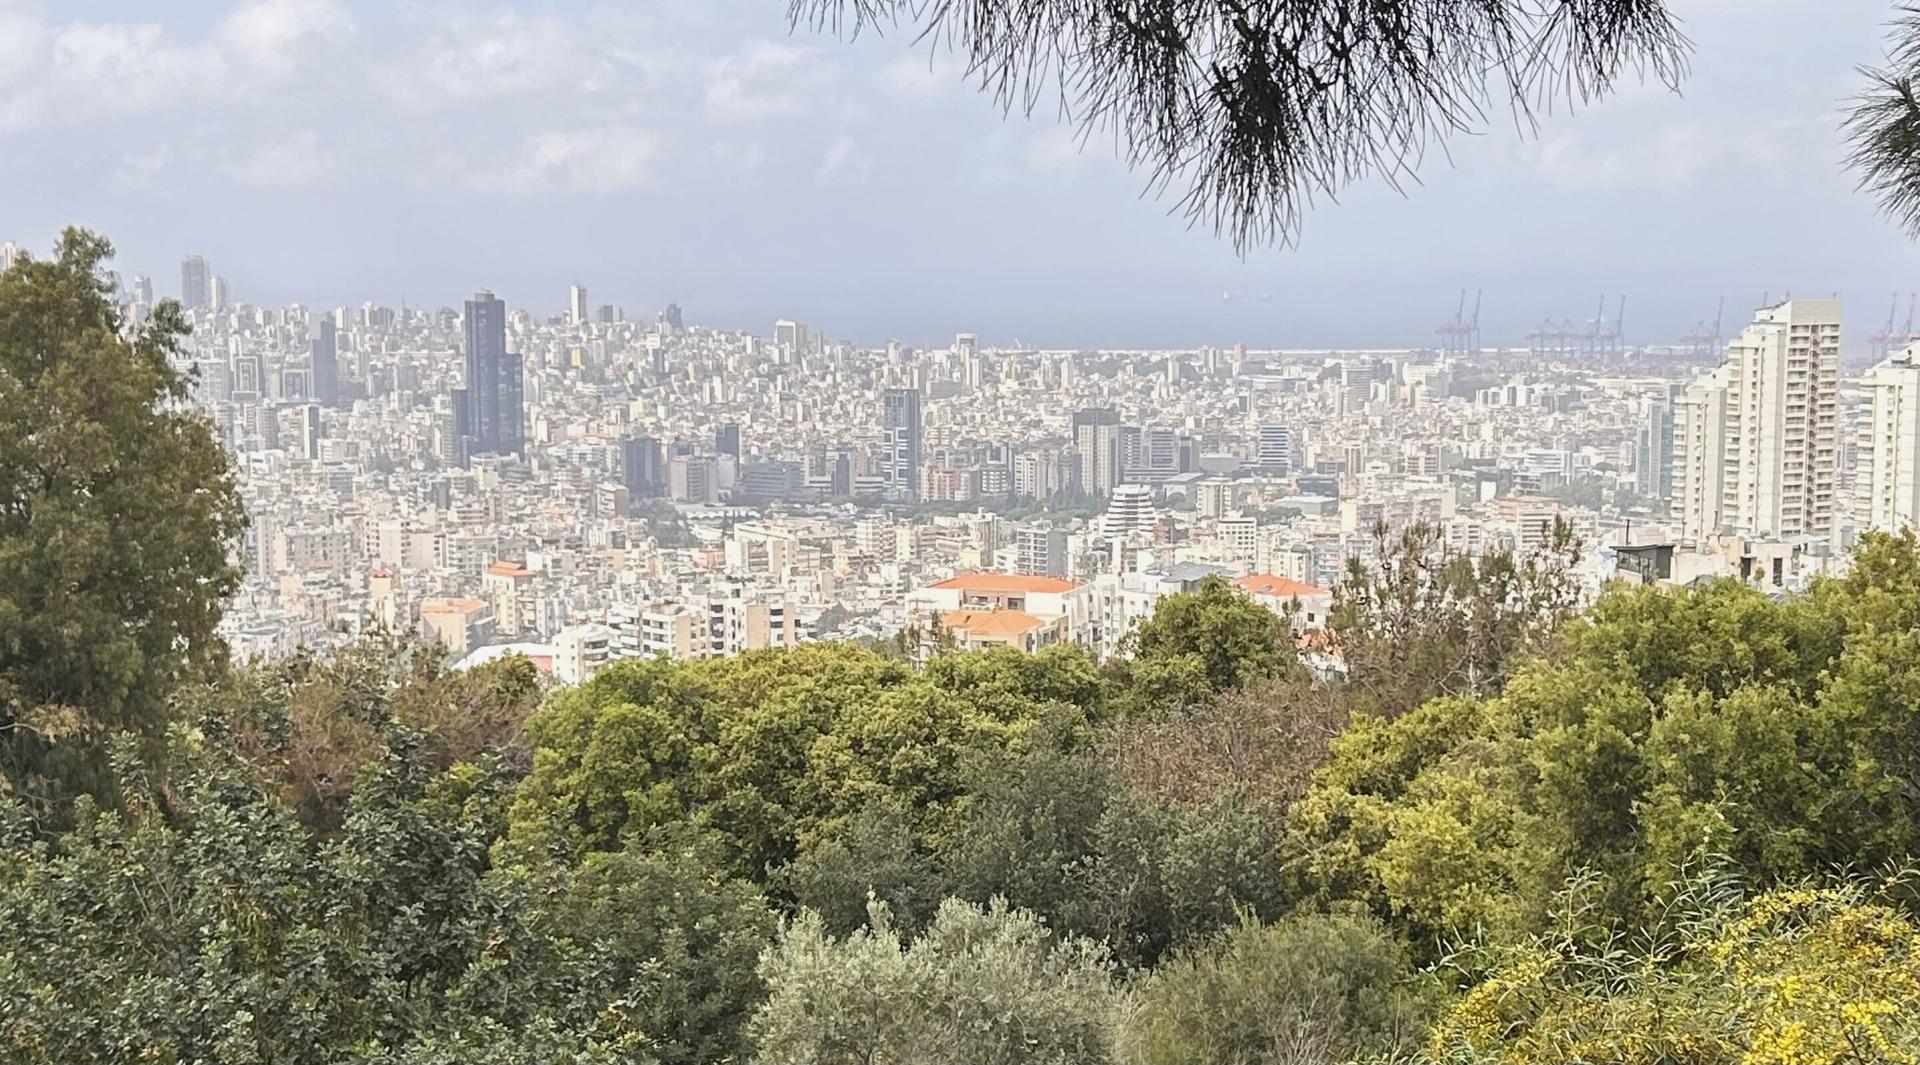 A resilient Lebanon: an interview with Guendalina Sassoli